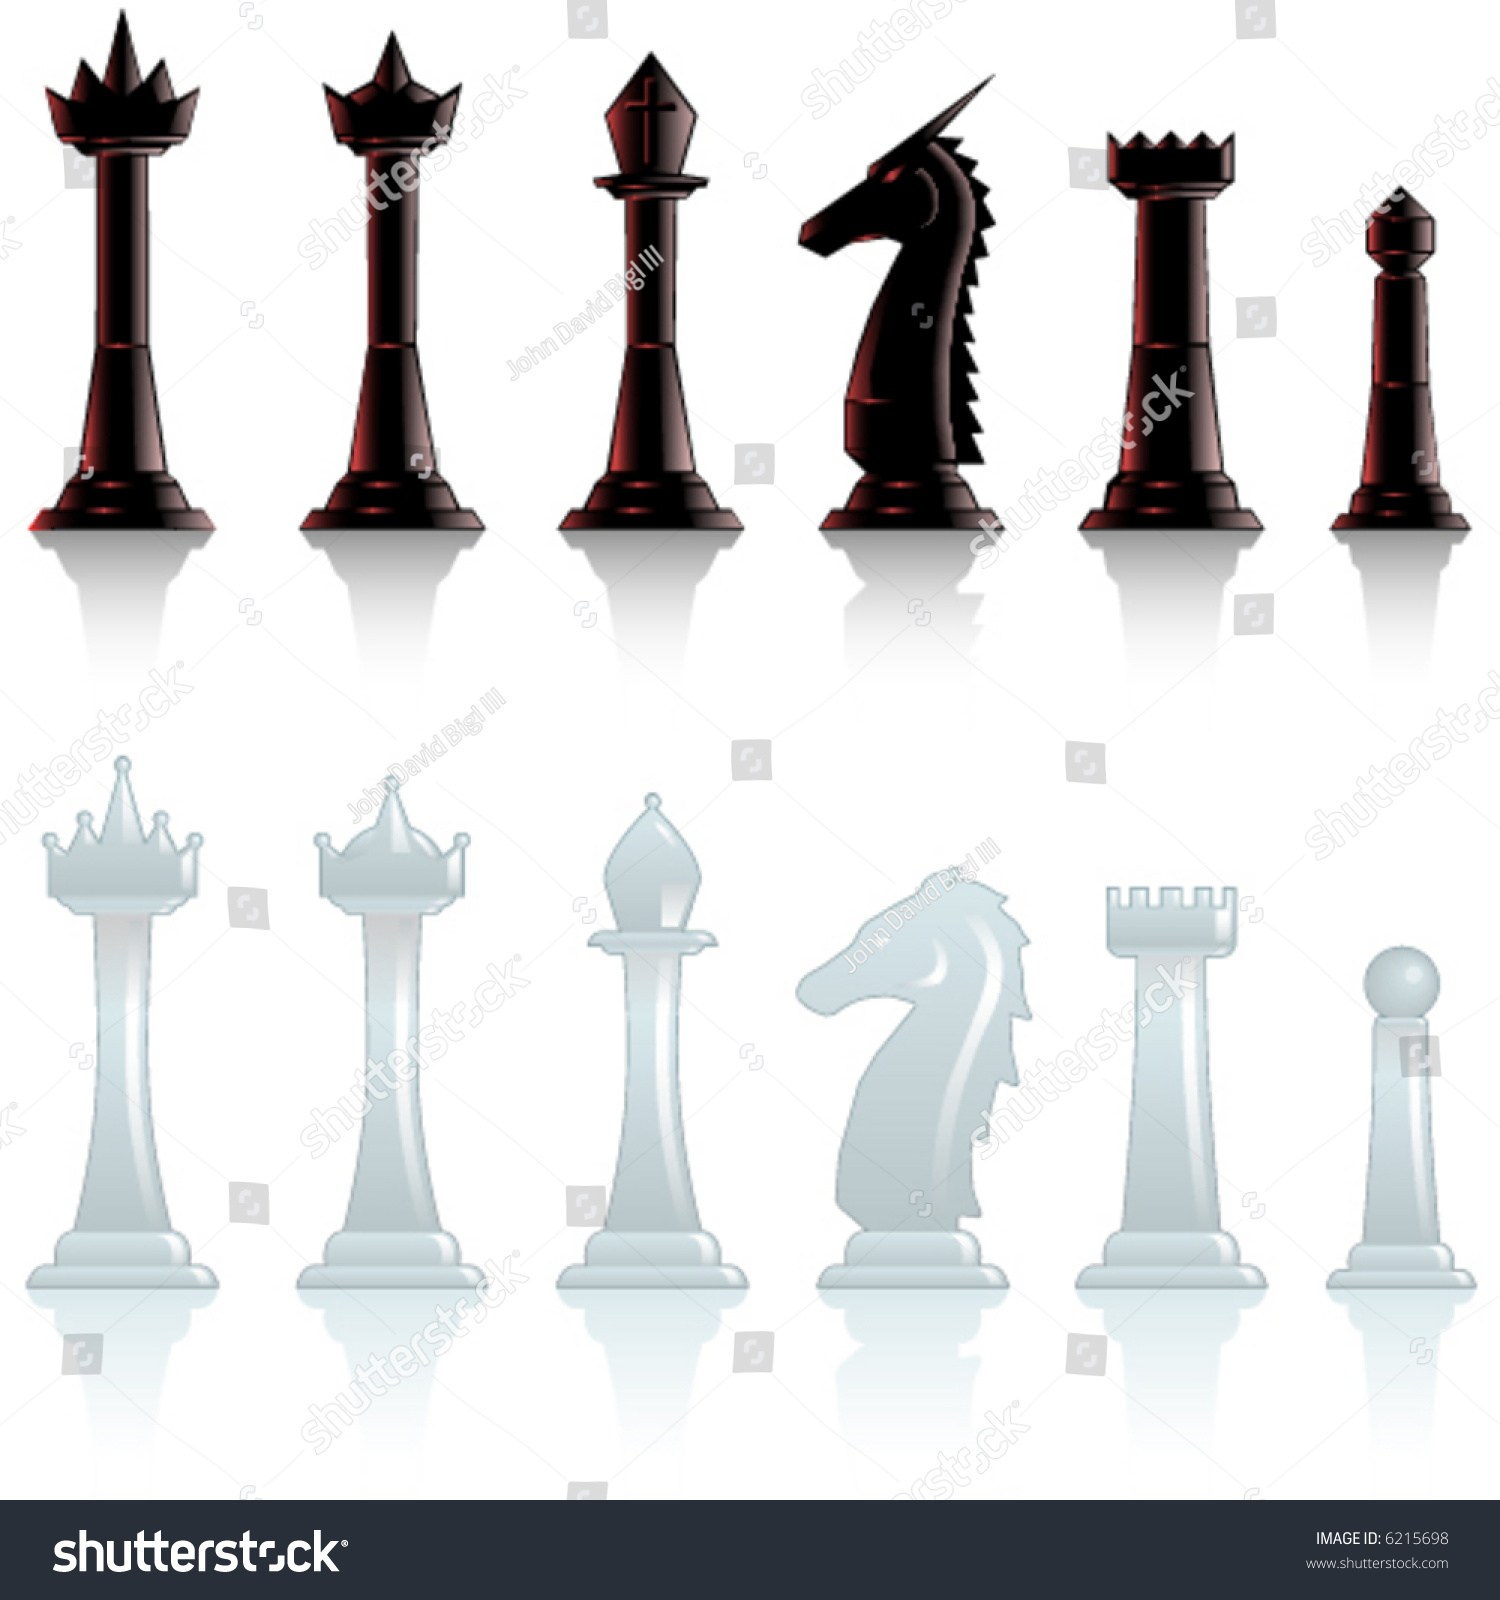 SVG of Single versions of all chess set pieces svg